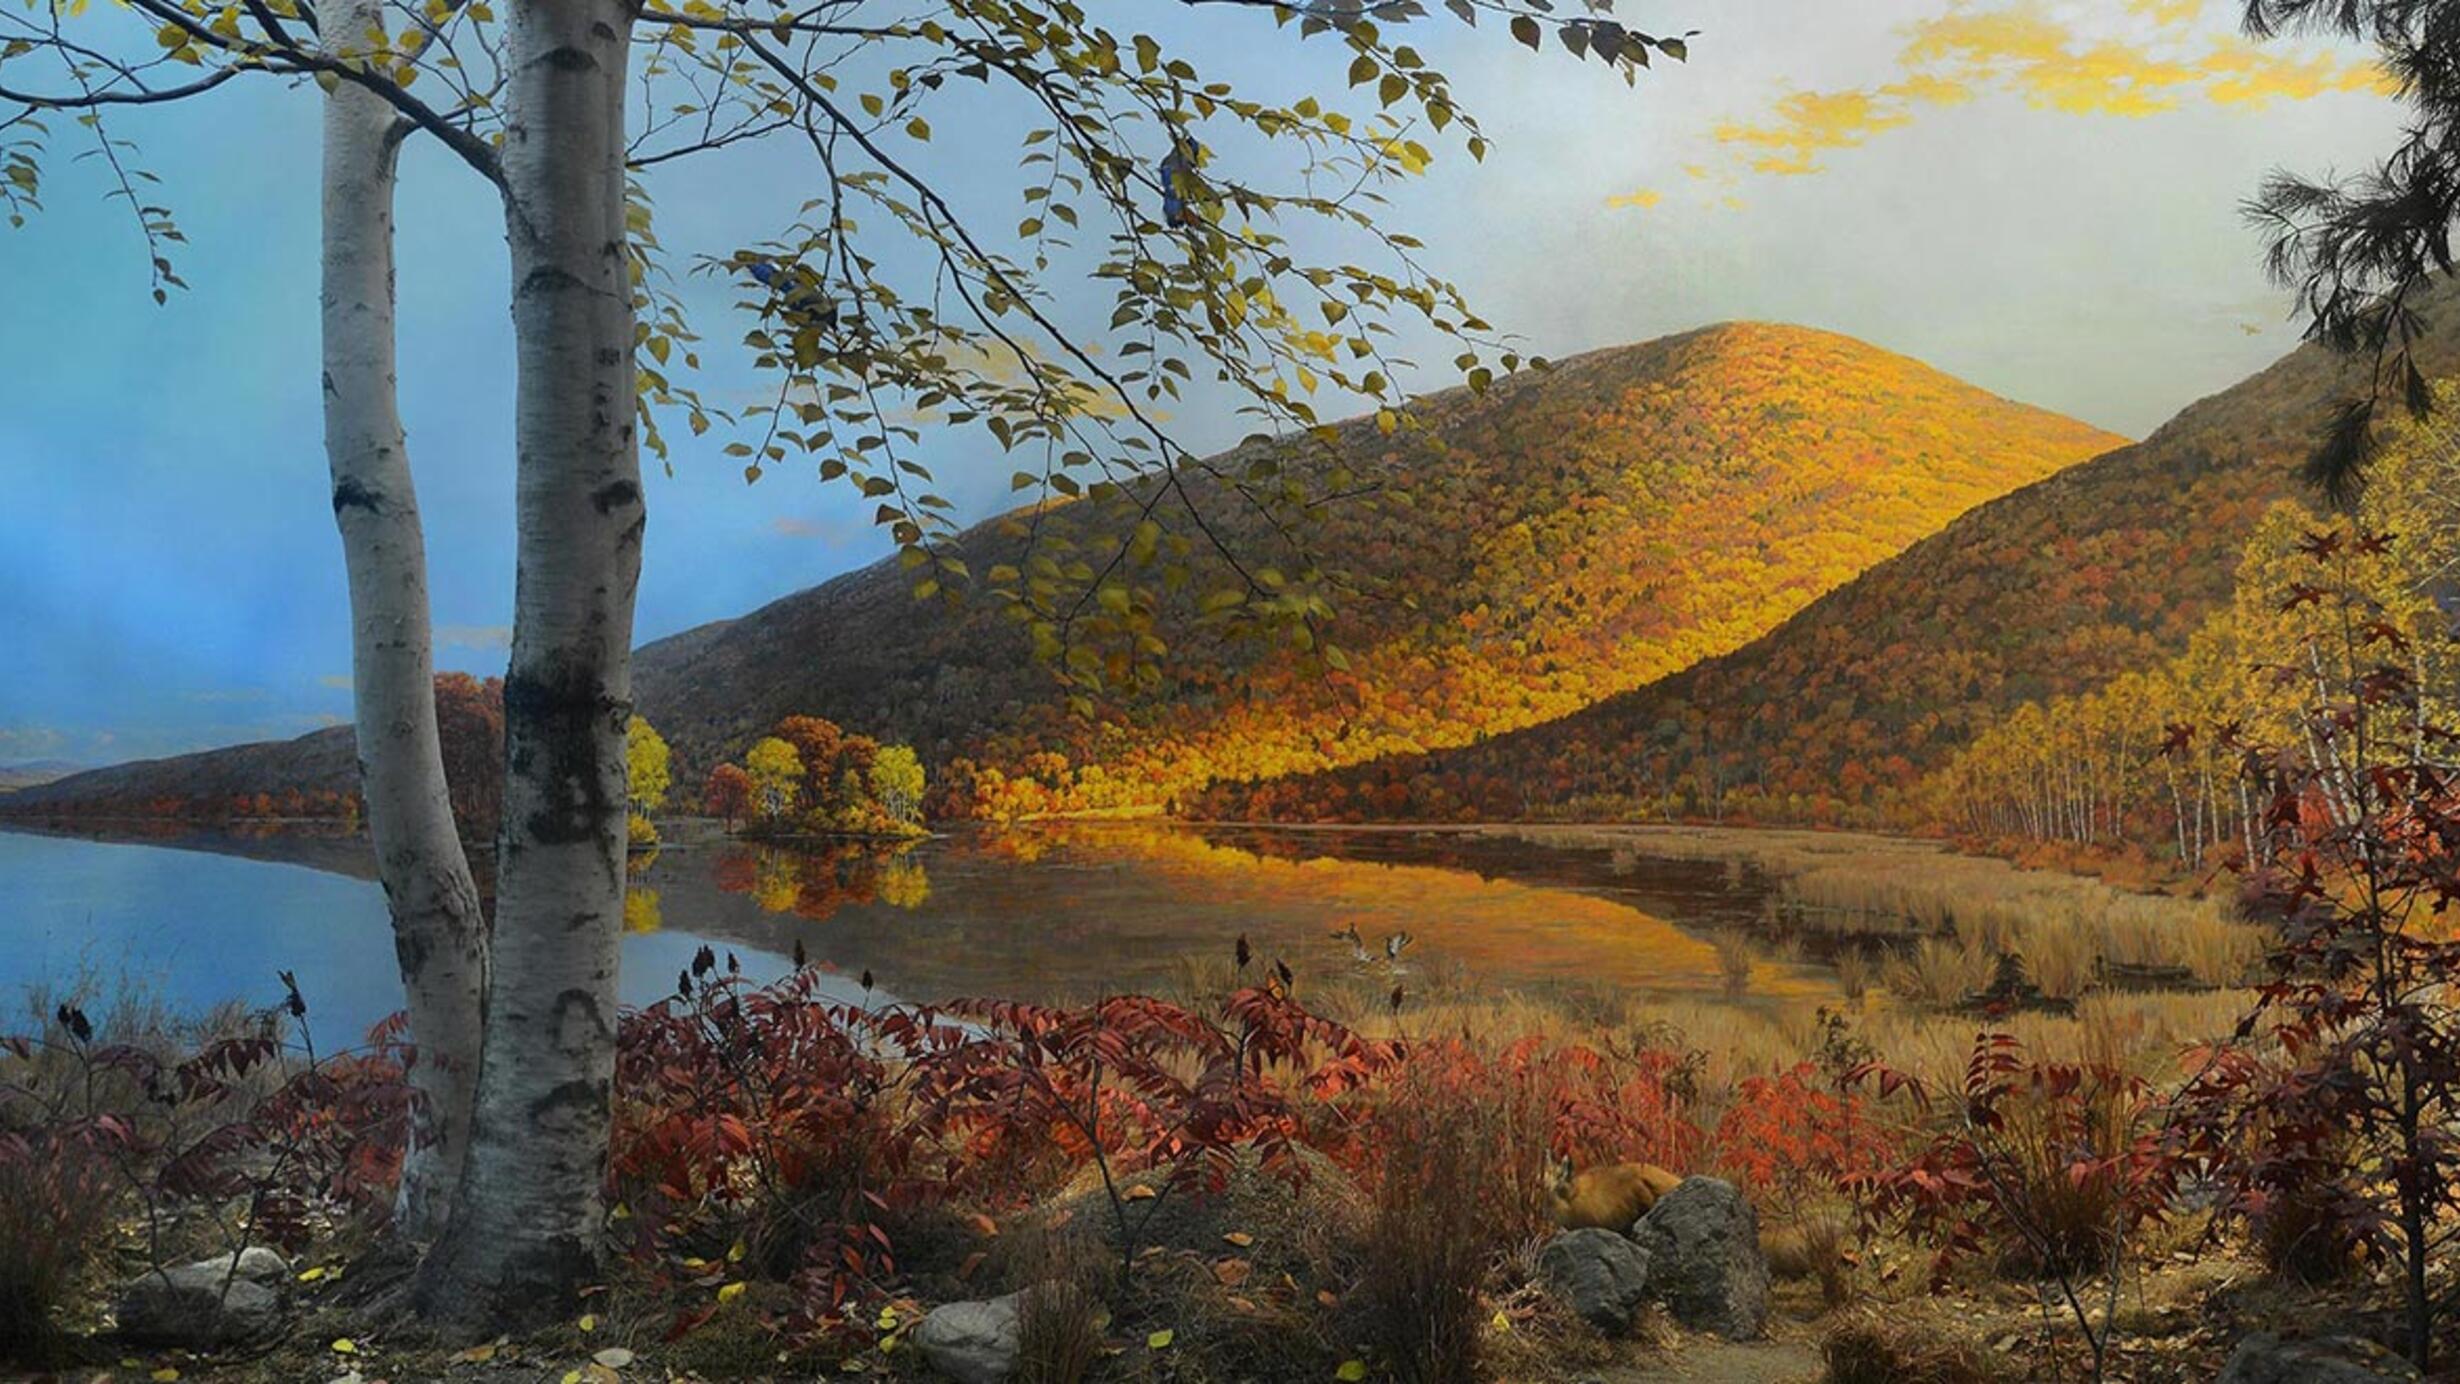 Diorama of Stissing Mountain in the fall, including trees, bushes and a lake.